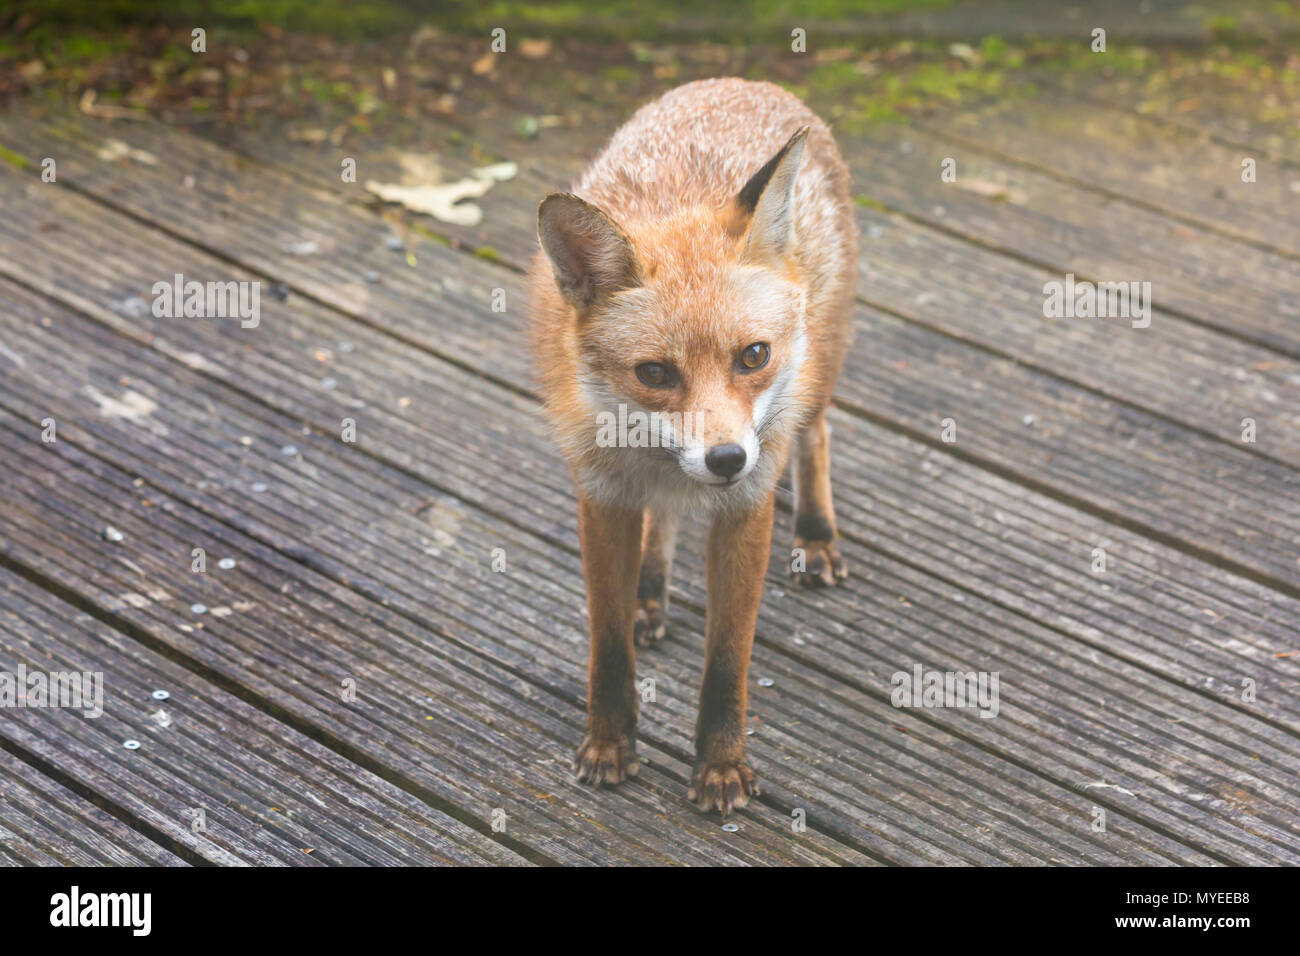 Bournemouth, Dorset, UK. 7th June 2018. Urban Fox, Vulpes Vulpes, looking for food in Bournemouth garden. Credit: Carolyn Jenkins/Alamy Live News Stock Photo